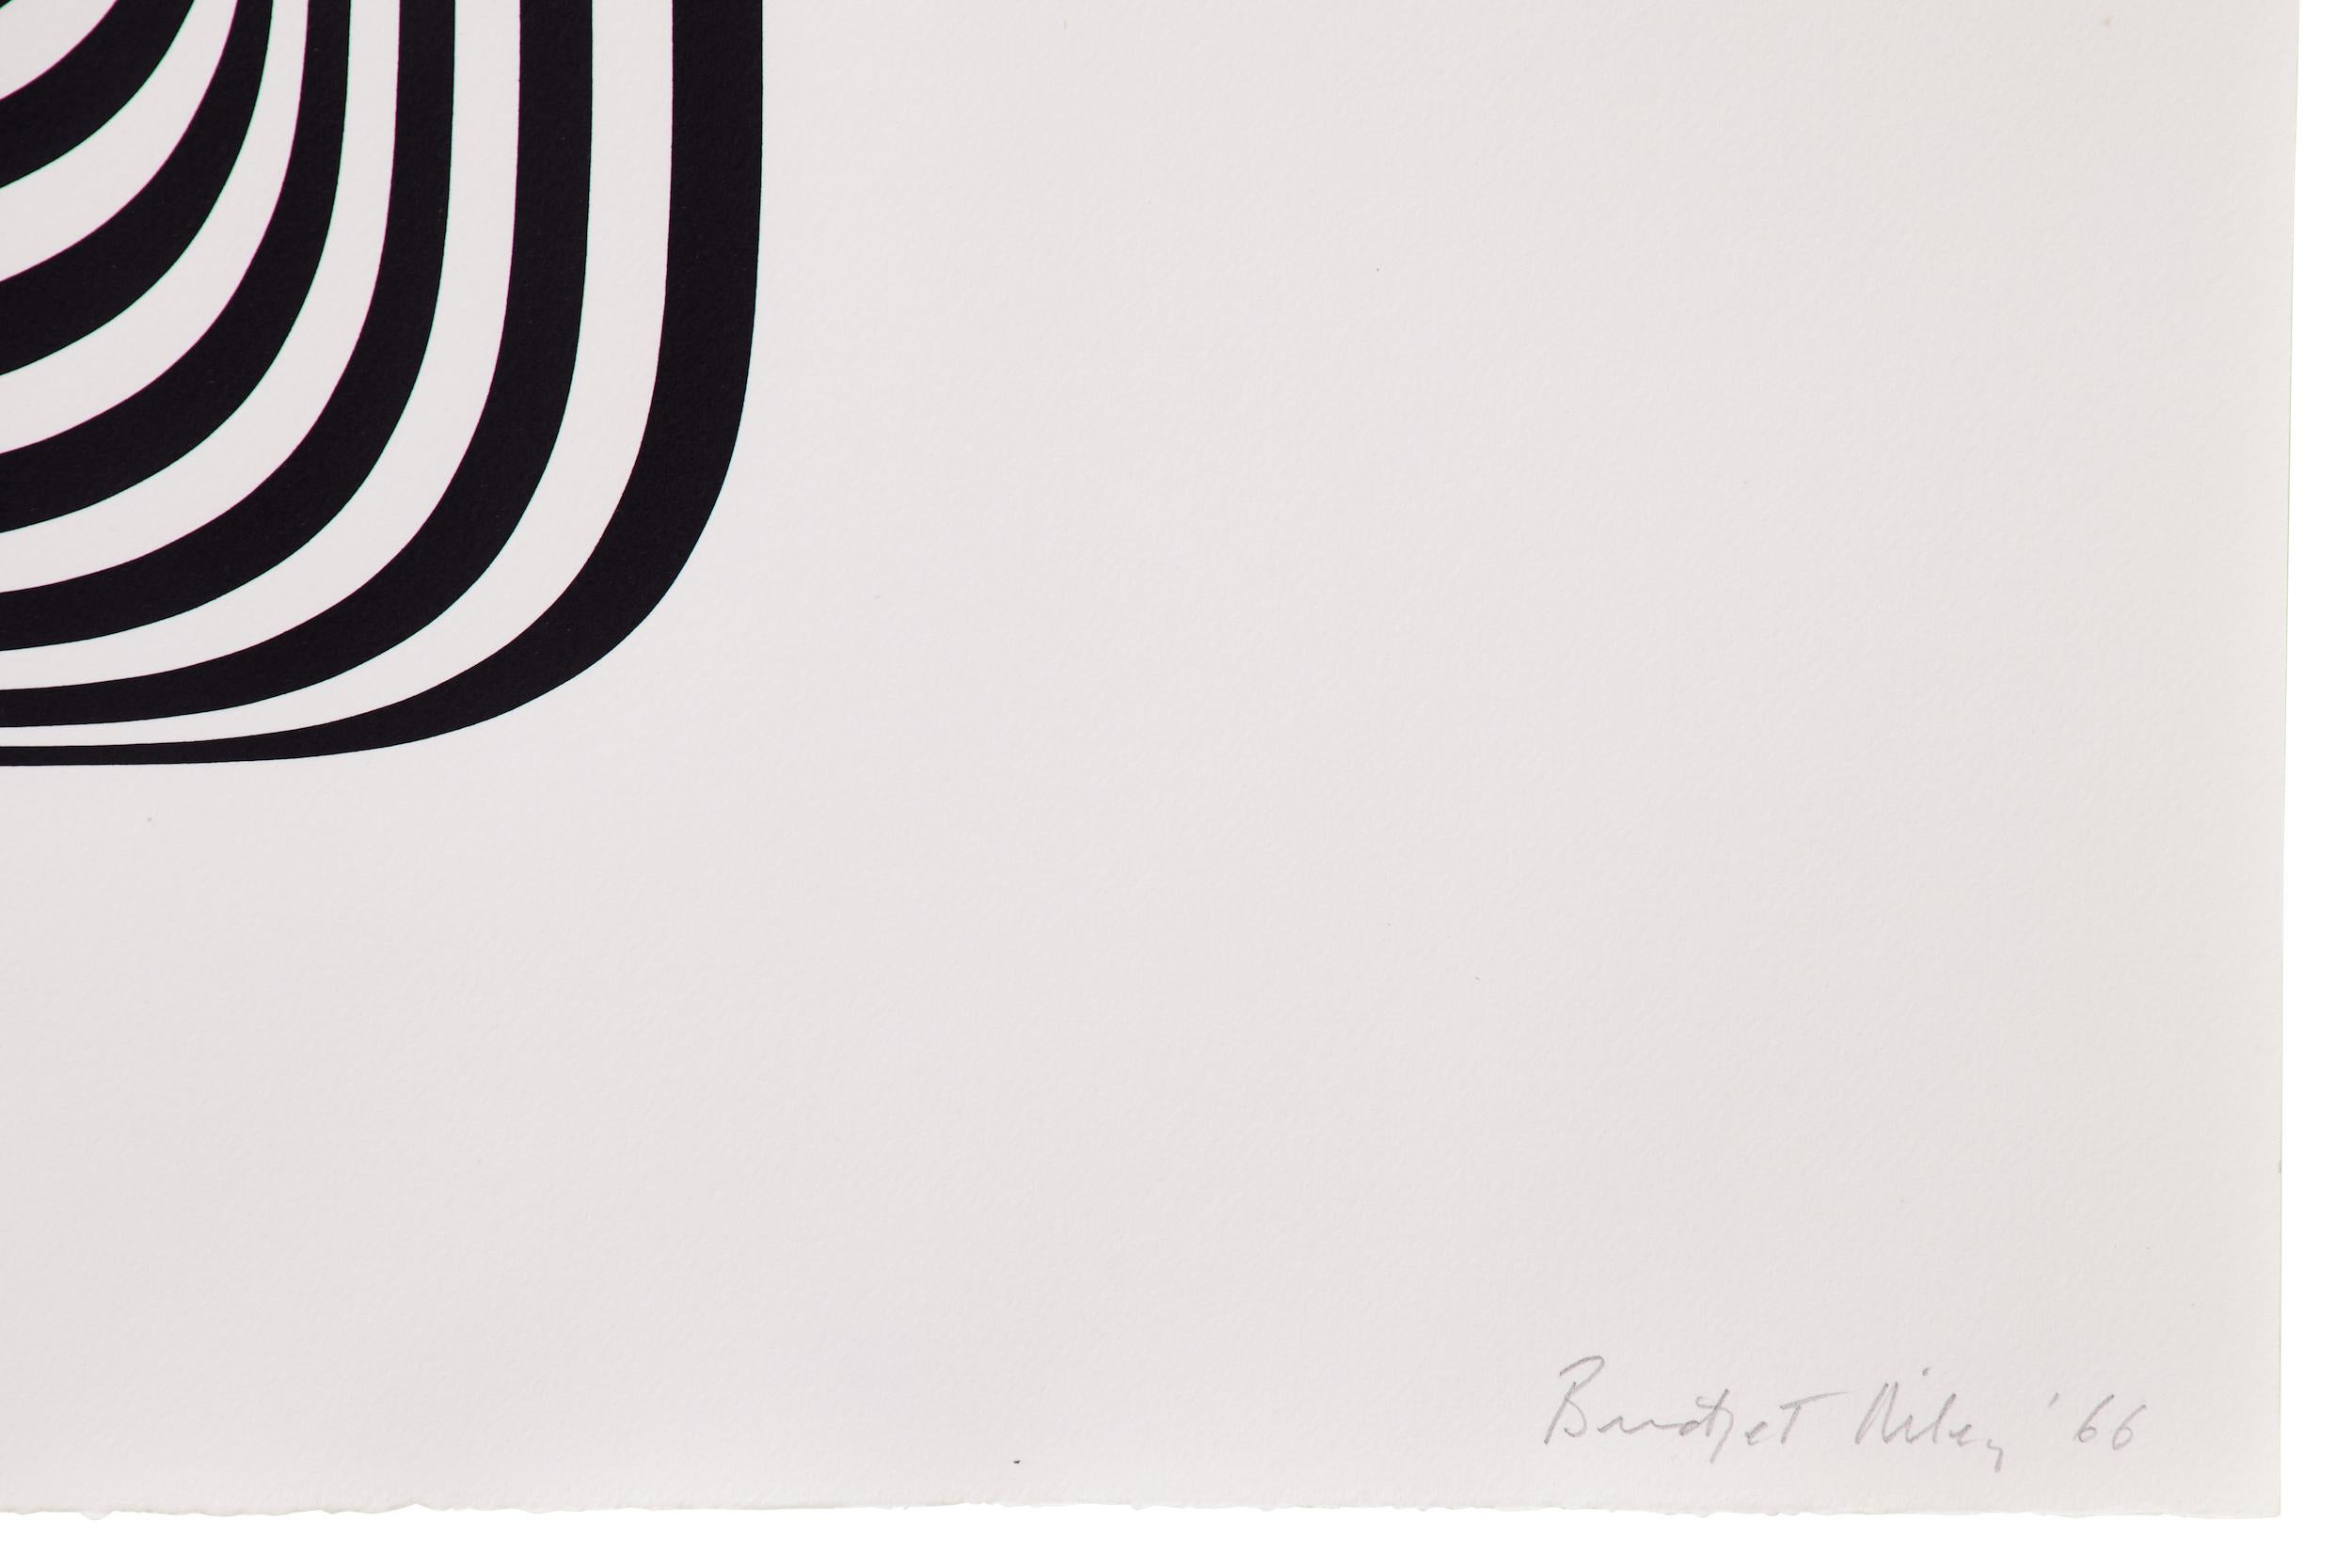 Untitled [Winged Curve], 1966
Bridget Riley

Screenprint in black, on wove
Signed, dated and numbered from the edition of 75
Printed by Kelpra Studio, London
Image: 36.9 × 40.9 cm (14.5 × 16.1 in)
Sheet: 57.8× 62.5 cm (22.8 × 24.6 in)
Literature: